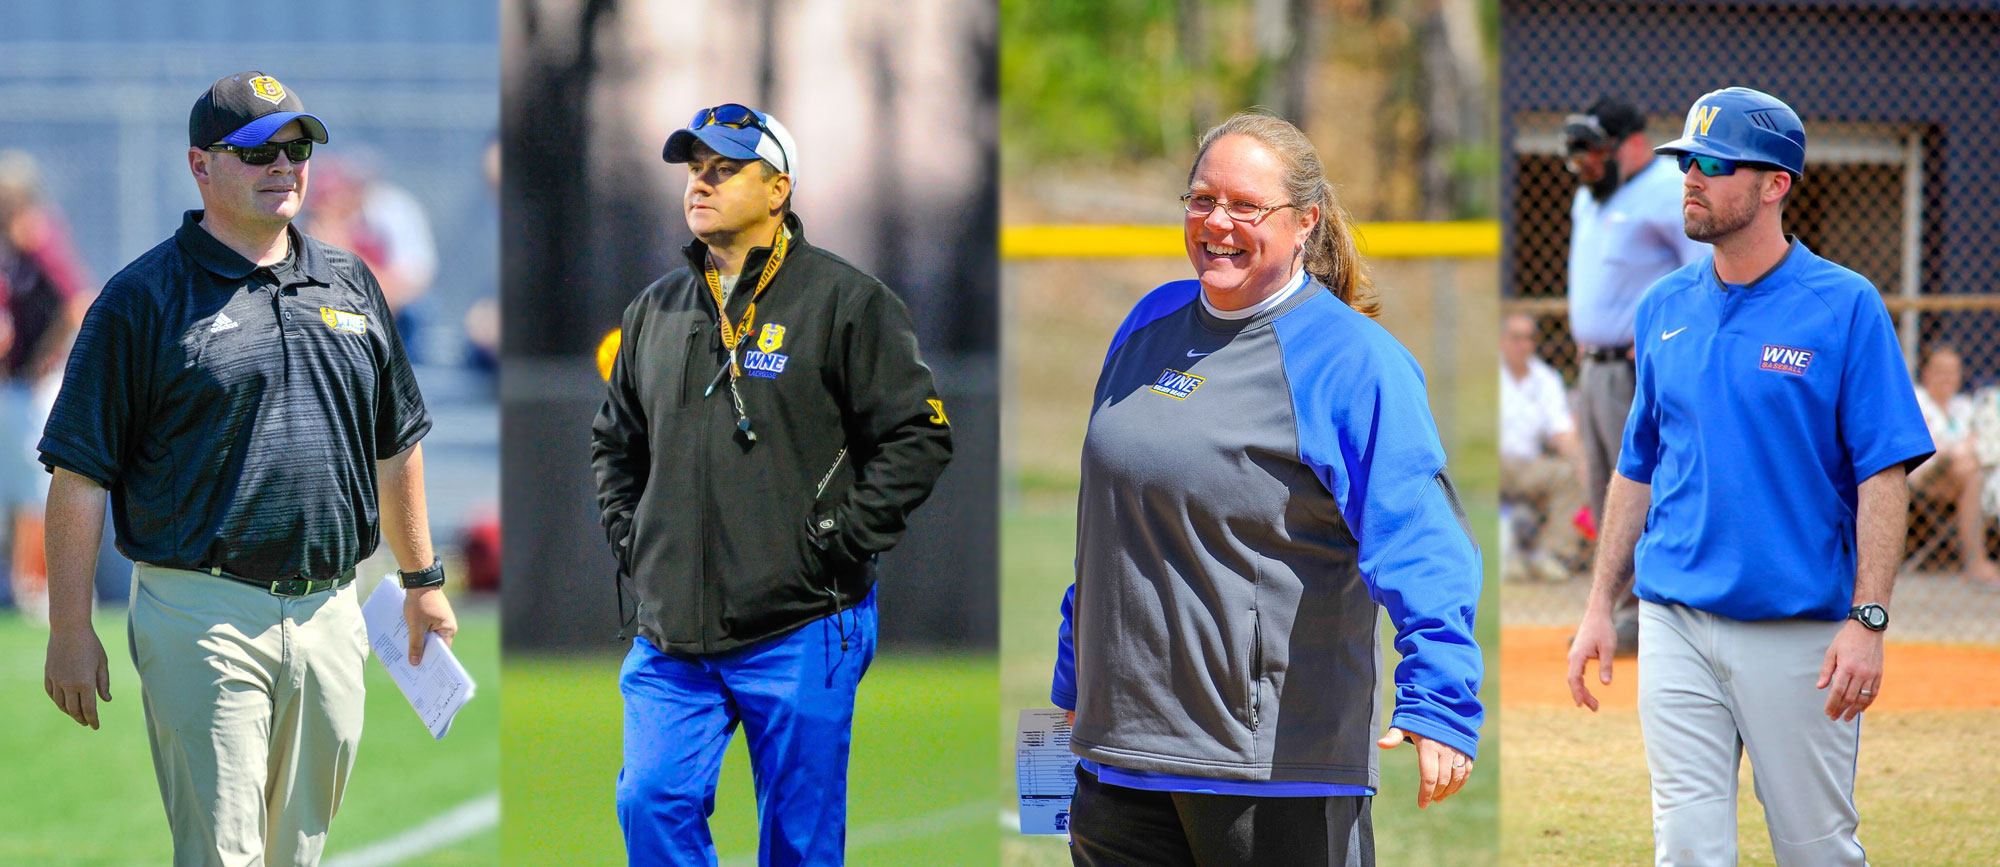 Catching Up with Western New England’s Four Coach of the Year Award Winners